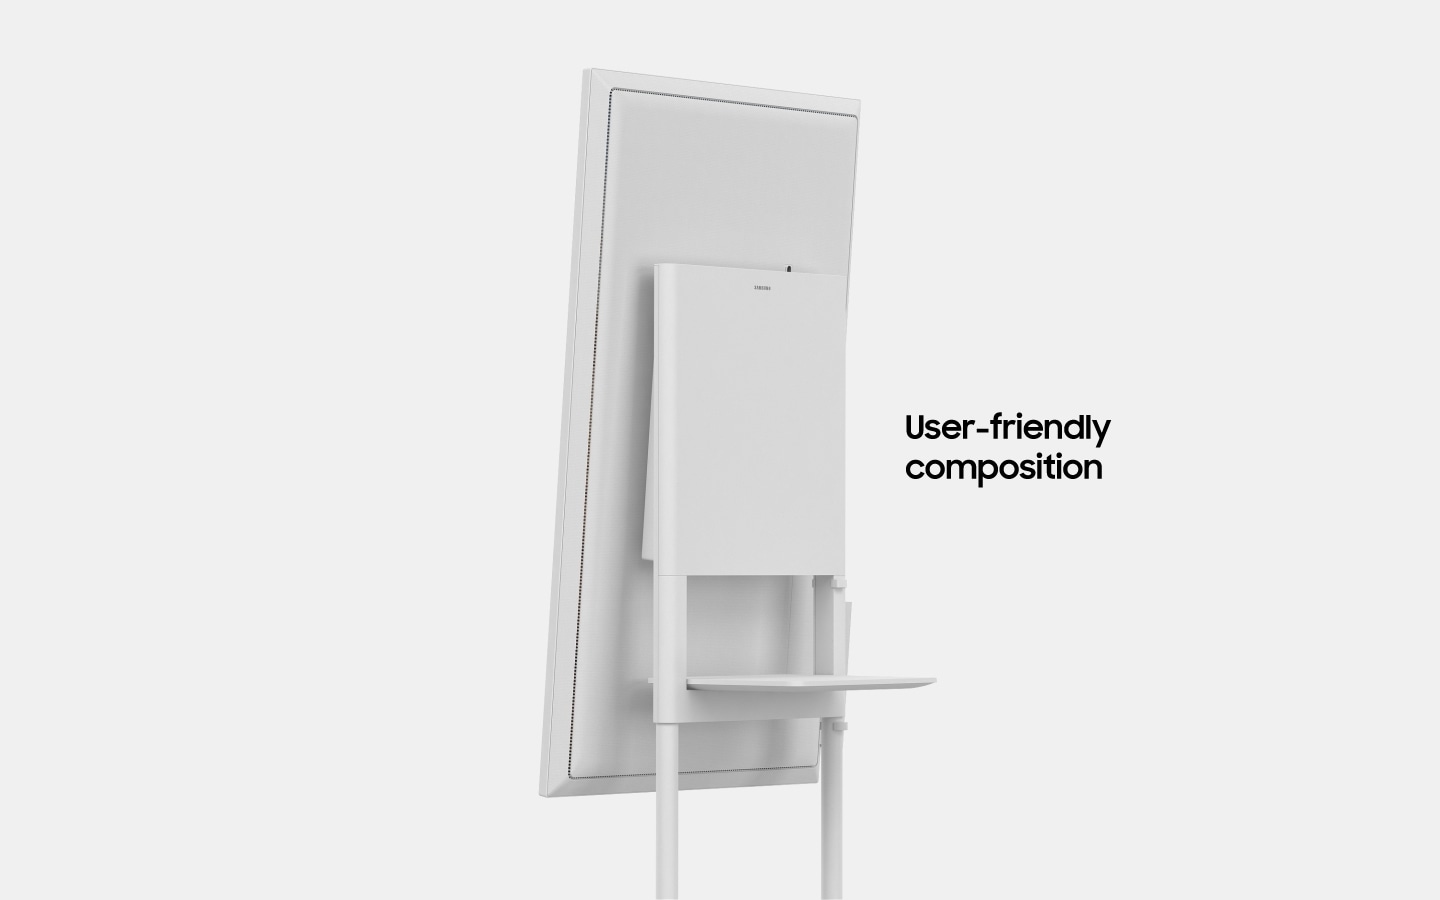 An image showing a Samsung Flip device slightly rotating towards the right with text that reads "User-friendly composition"(6-5)